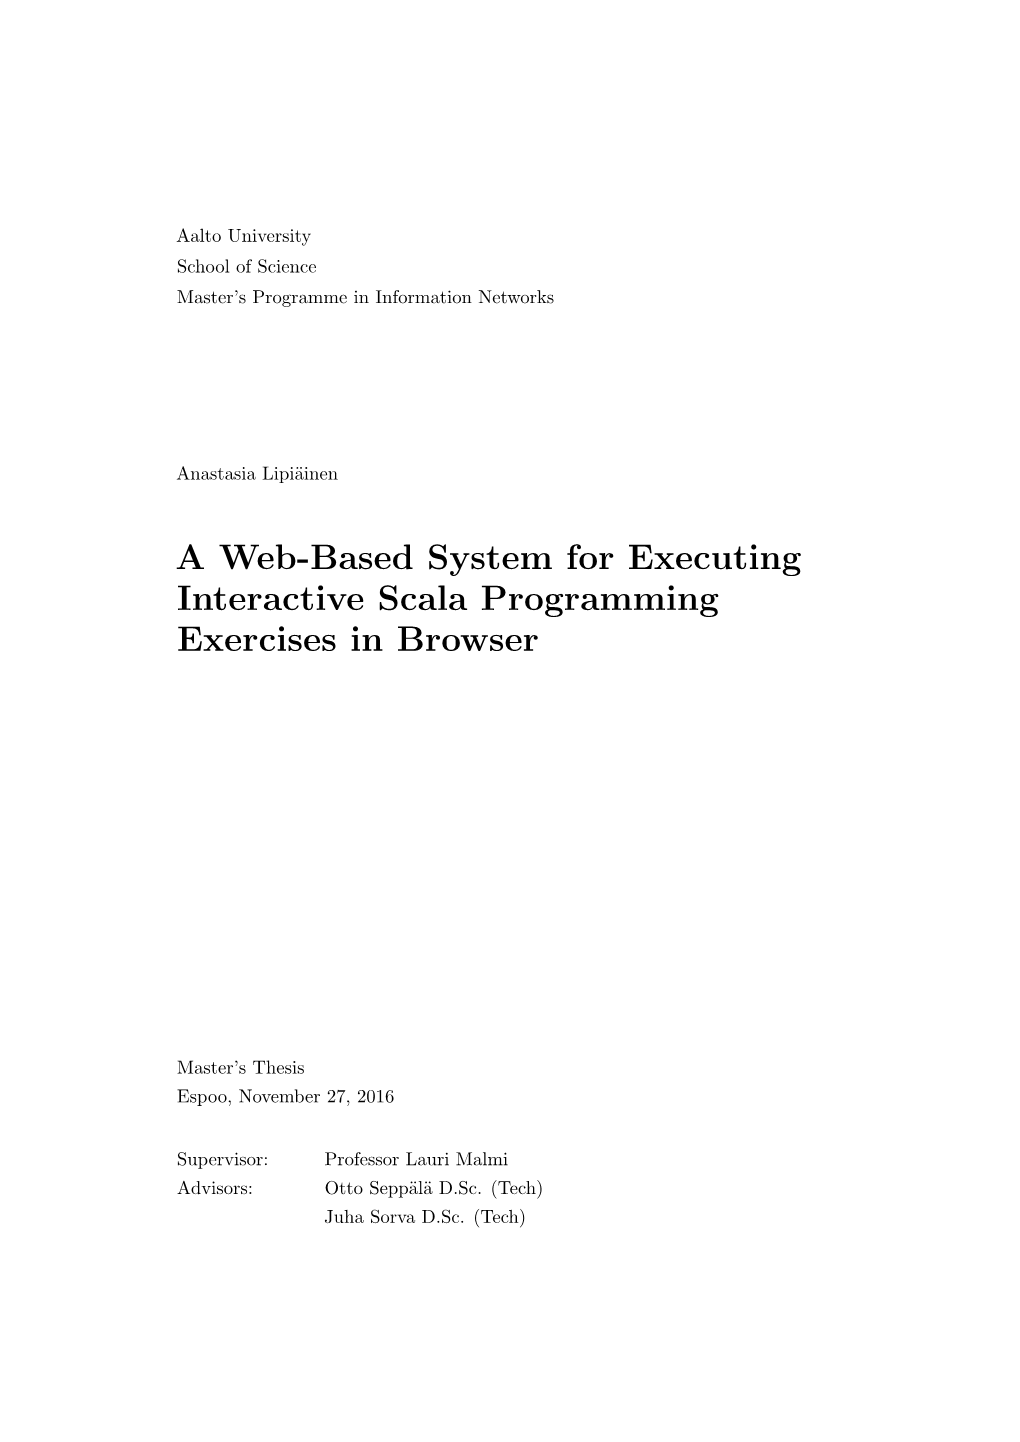 A Web-Based System for Executing Interactive Scala Programming Exercises in Browser